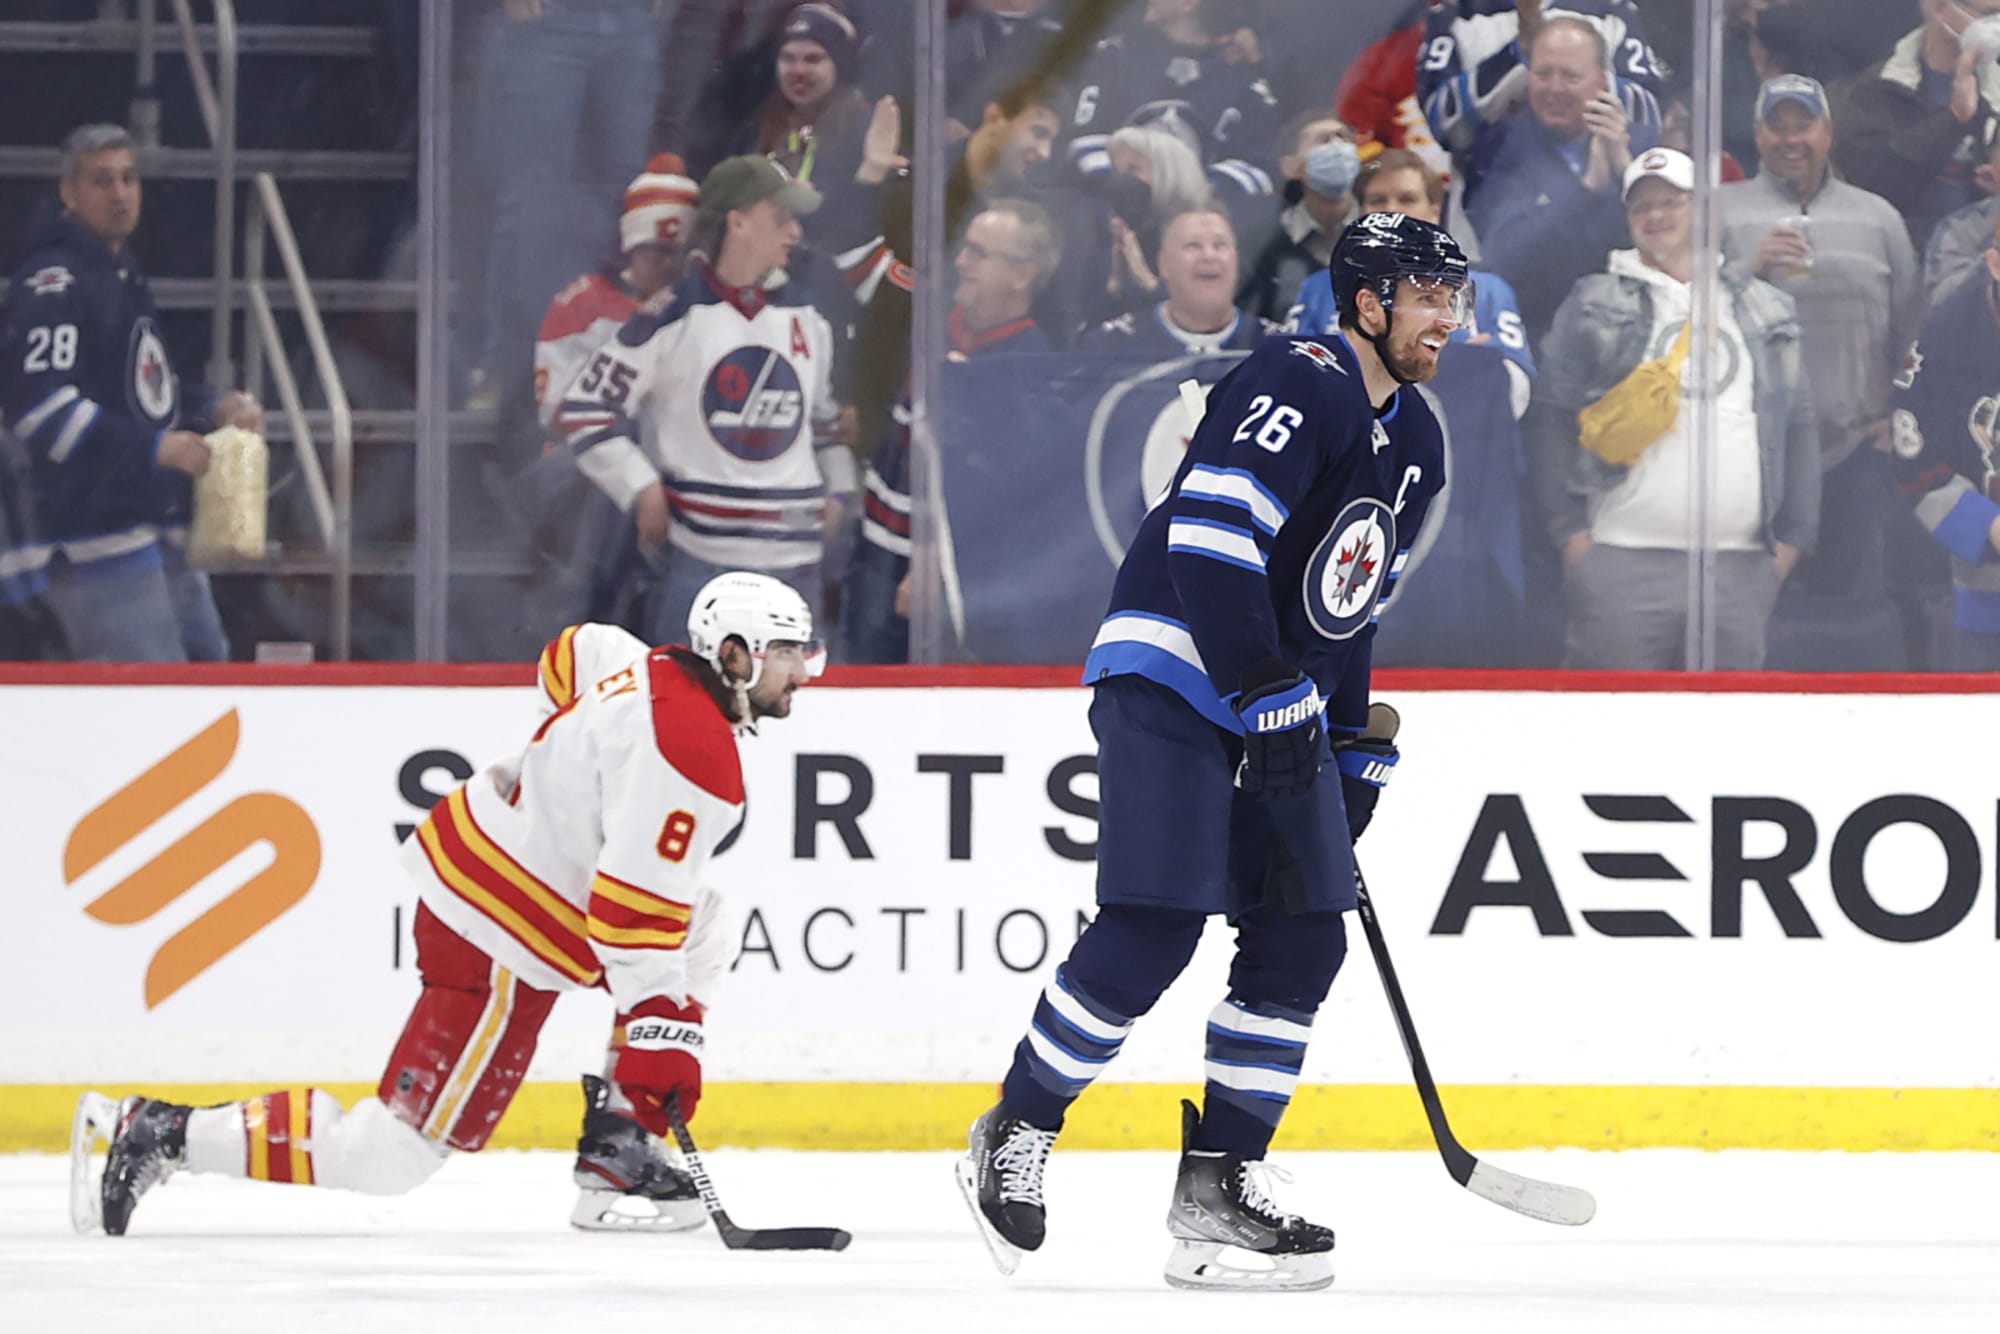 Jets play the Avalanche on 3-game winning streak